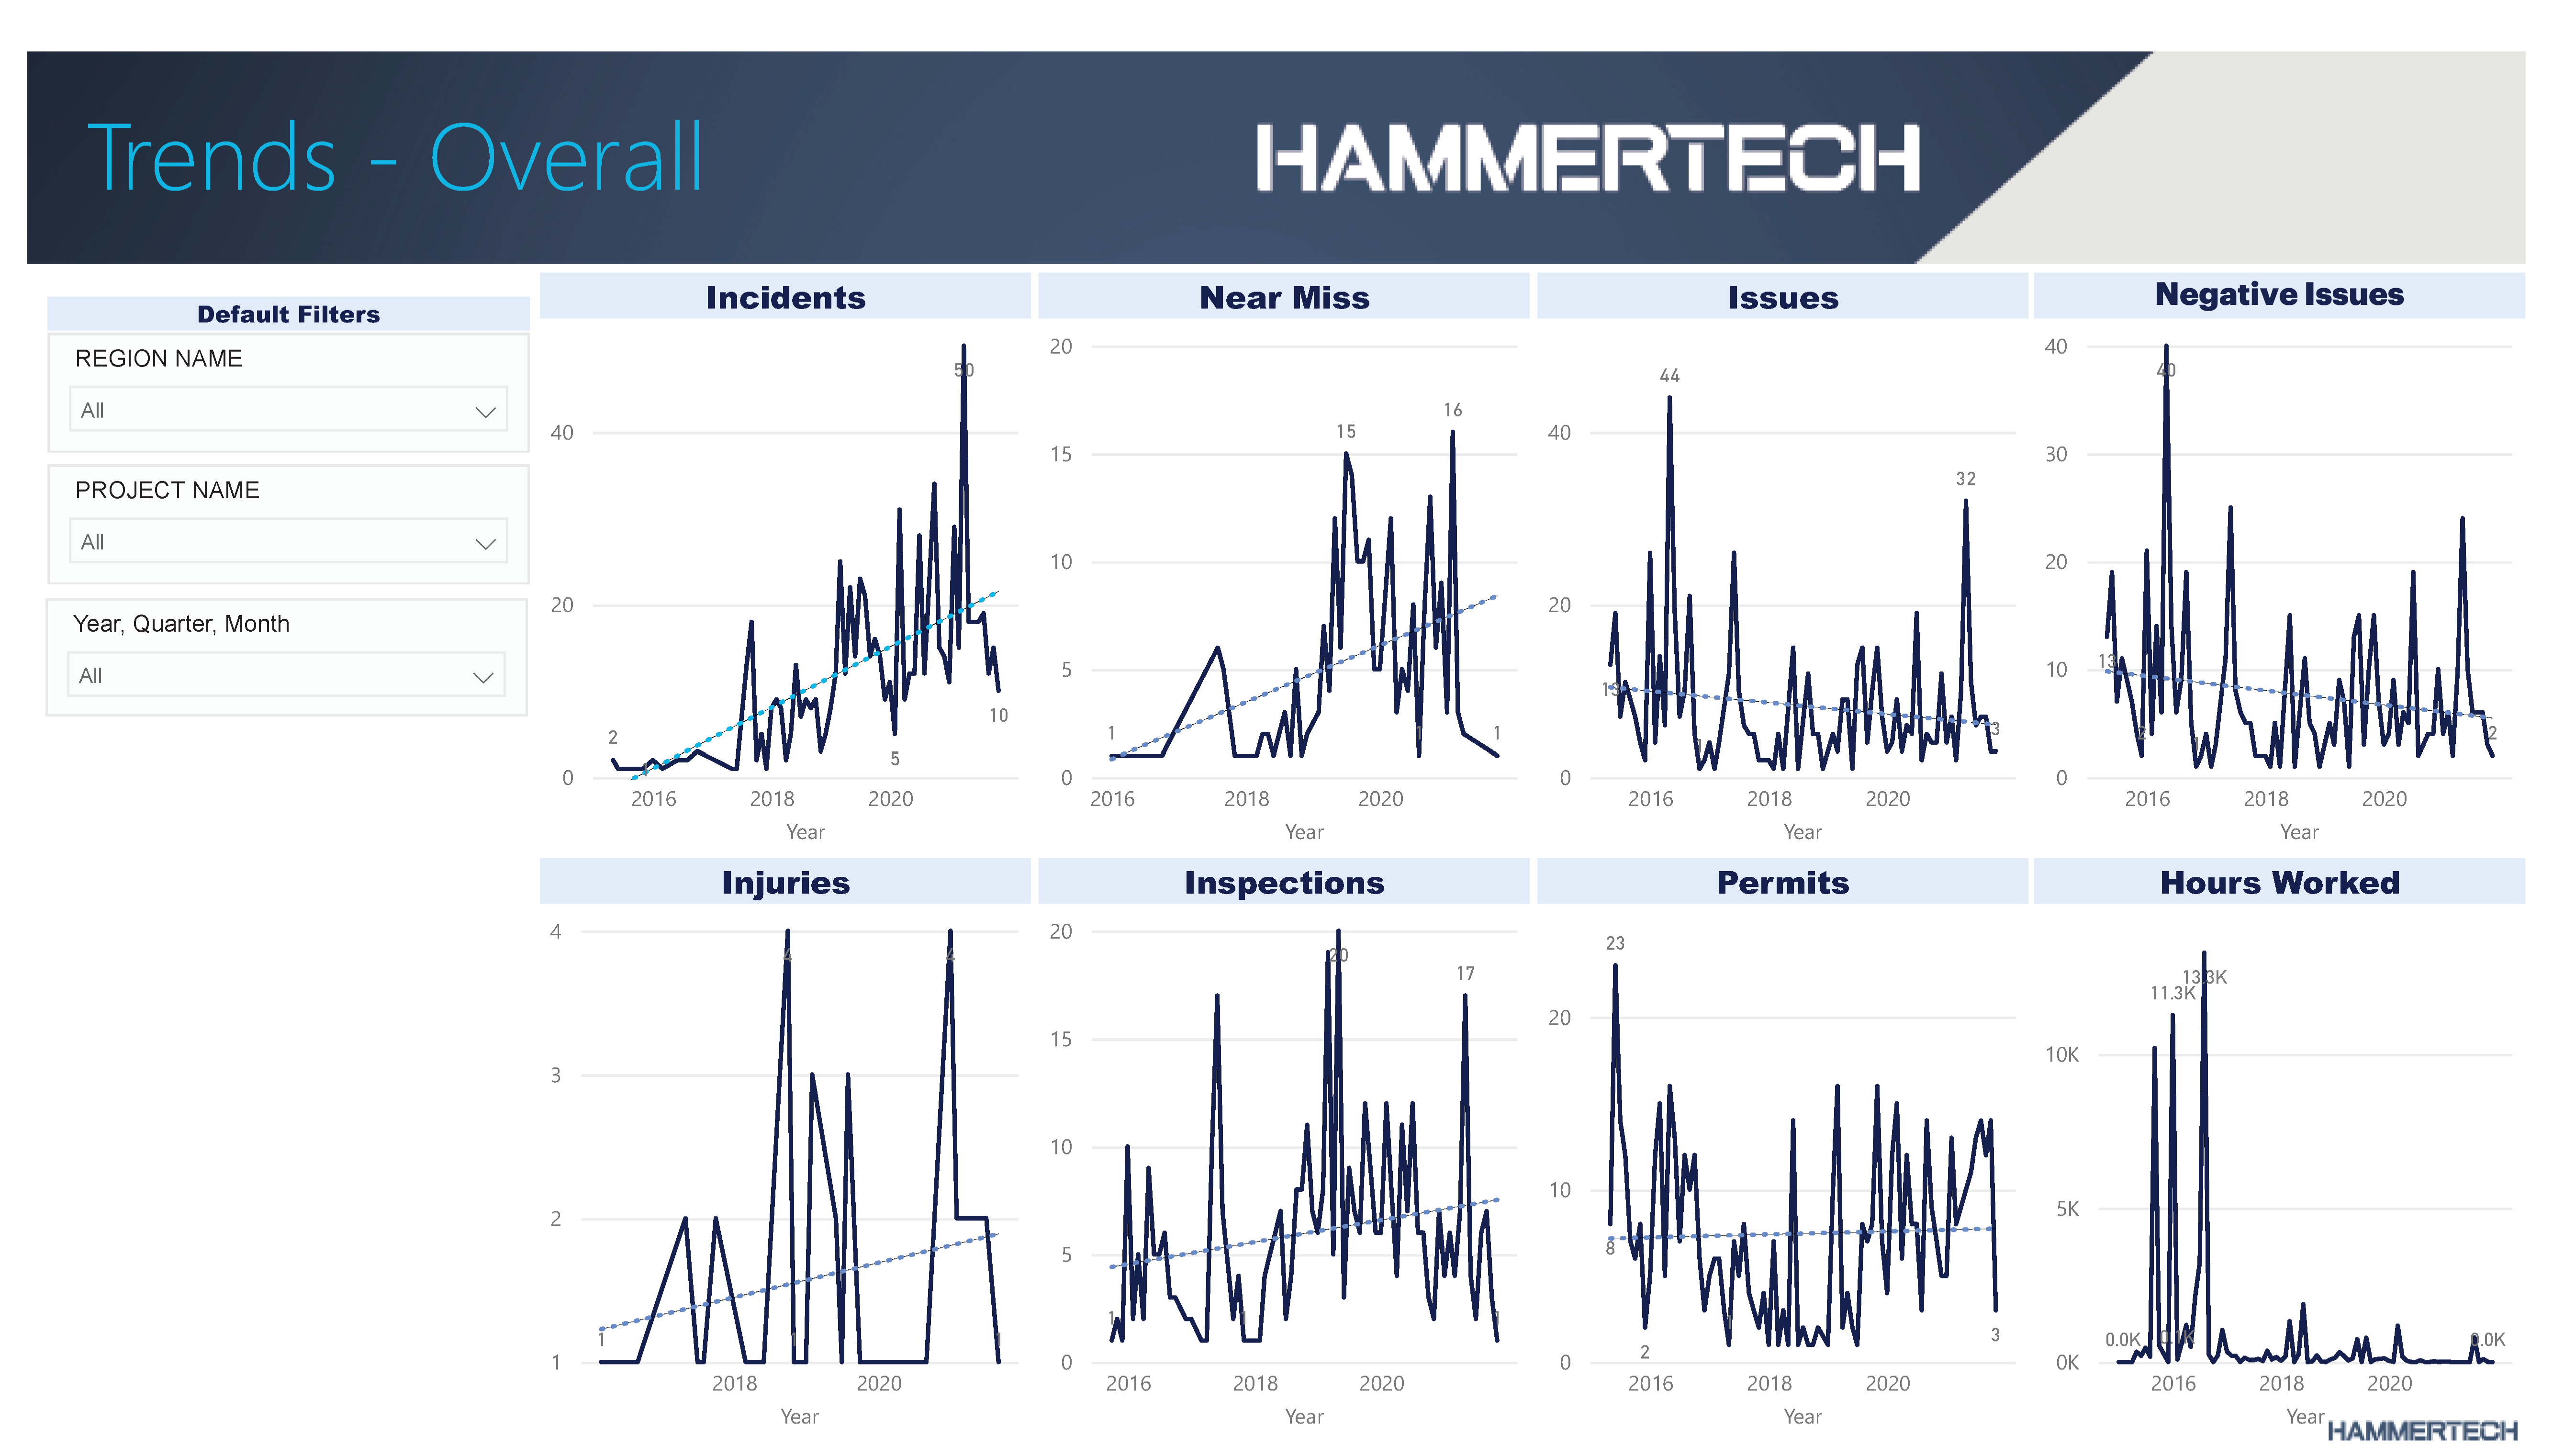 Screenshot of HammerTech's trends chart, providing a multi-faceted overview of key construction project indicators including incidents, near misses, issues, negative issues, injuries, inspections, permits, and hours worked. This comprehensive visual tool equips finance executives with vital real-time data, enabling swift and informed decision-making to prevent costly delays. HammerTech's EHS software suite automates report generation, offering up to 43% more accuracy and tracking Stop Works Notices to mitigate delay risks. Leveraging historic Project IQ data, finance teams can refine construction methods, optimize bid assessment, and enhance project profitability.